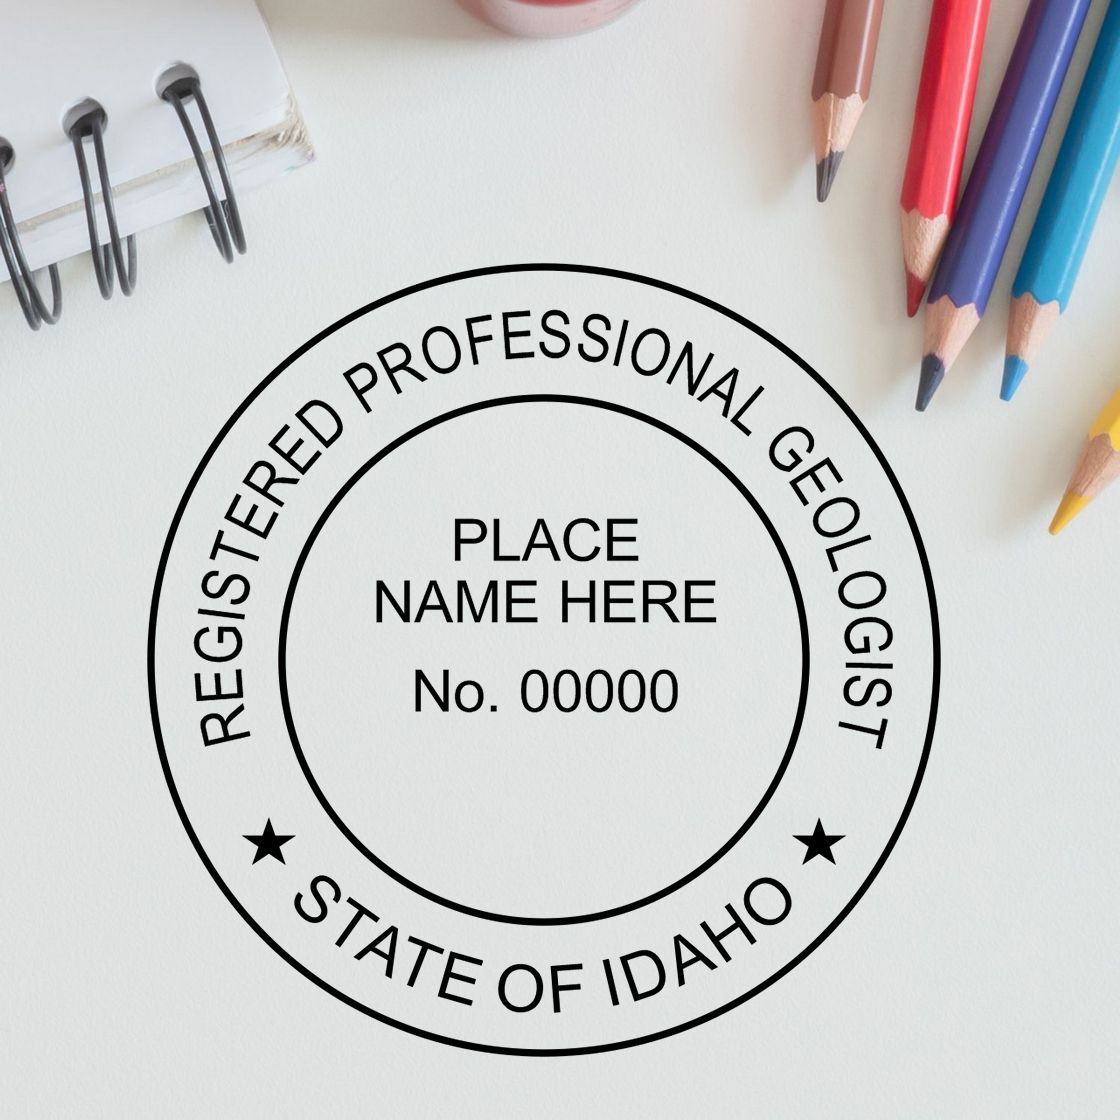 The Idaho Professional Geologist Seal Stamp stamp impression comes to life with a crisp, detailed image stamped on paper - showcasing true professional quality.